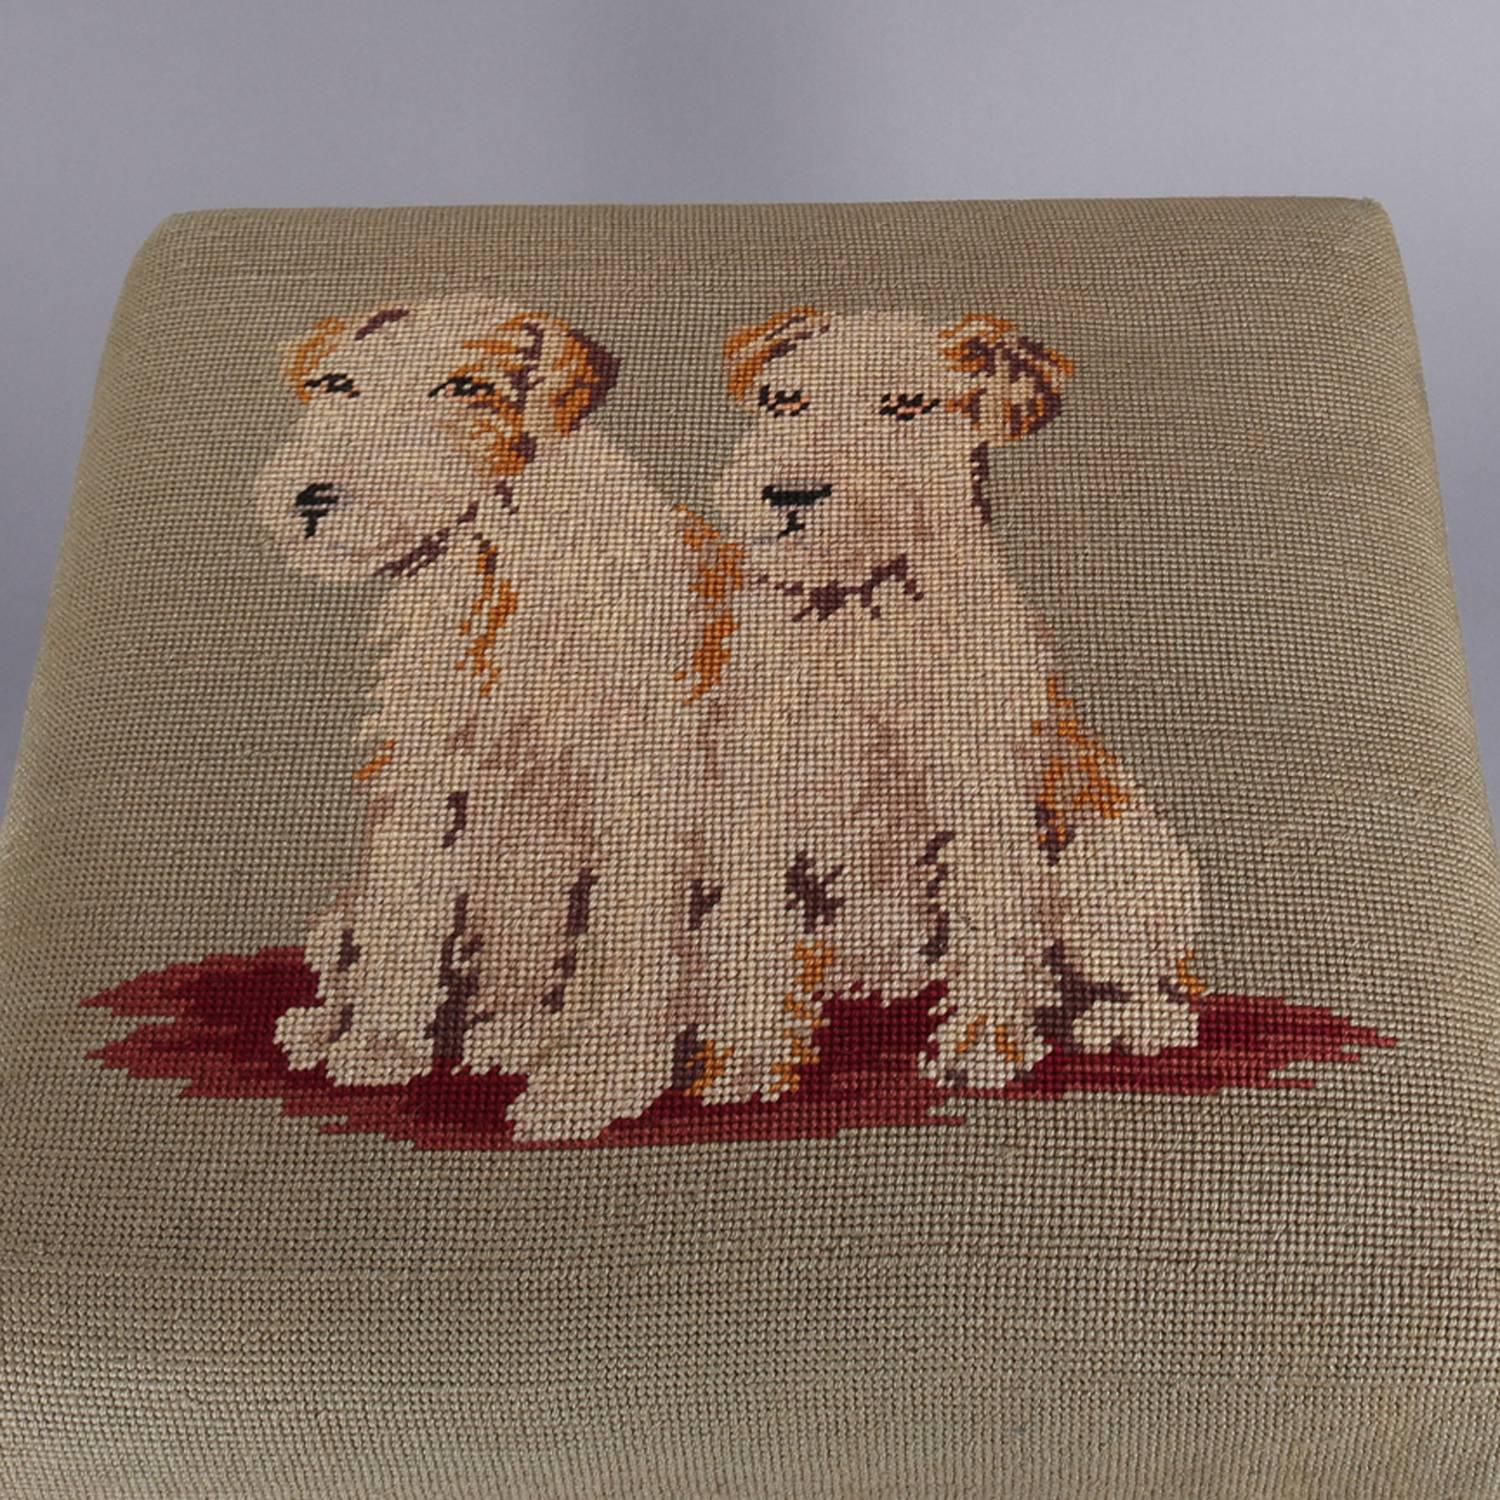 Antique Chippendale style tapestry footstool features needlepoint seat with Welsh or Airedale Terrier puppies secured with brass tacks and seated on carved mahogany cabriole legs with stylized acanthus knees and paw feet, circa 1920

Measures: 16